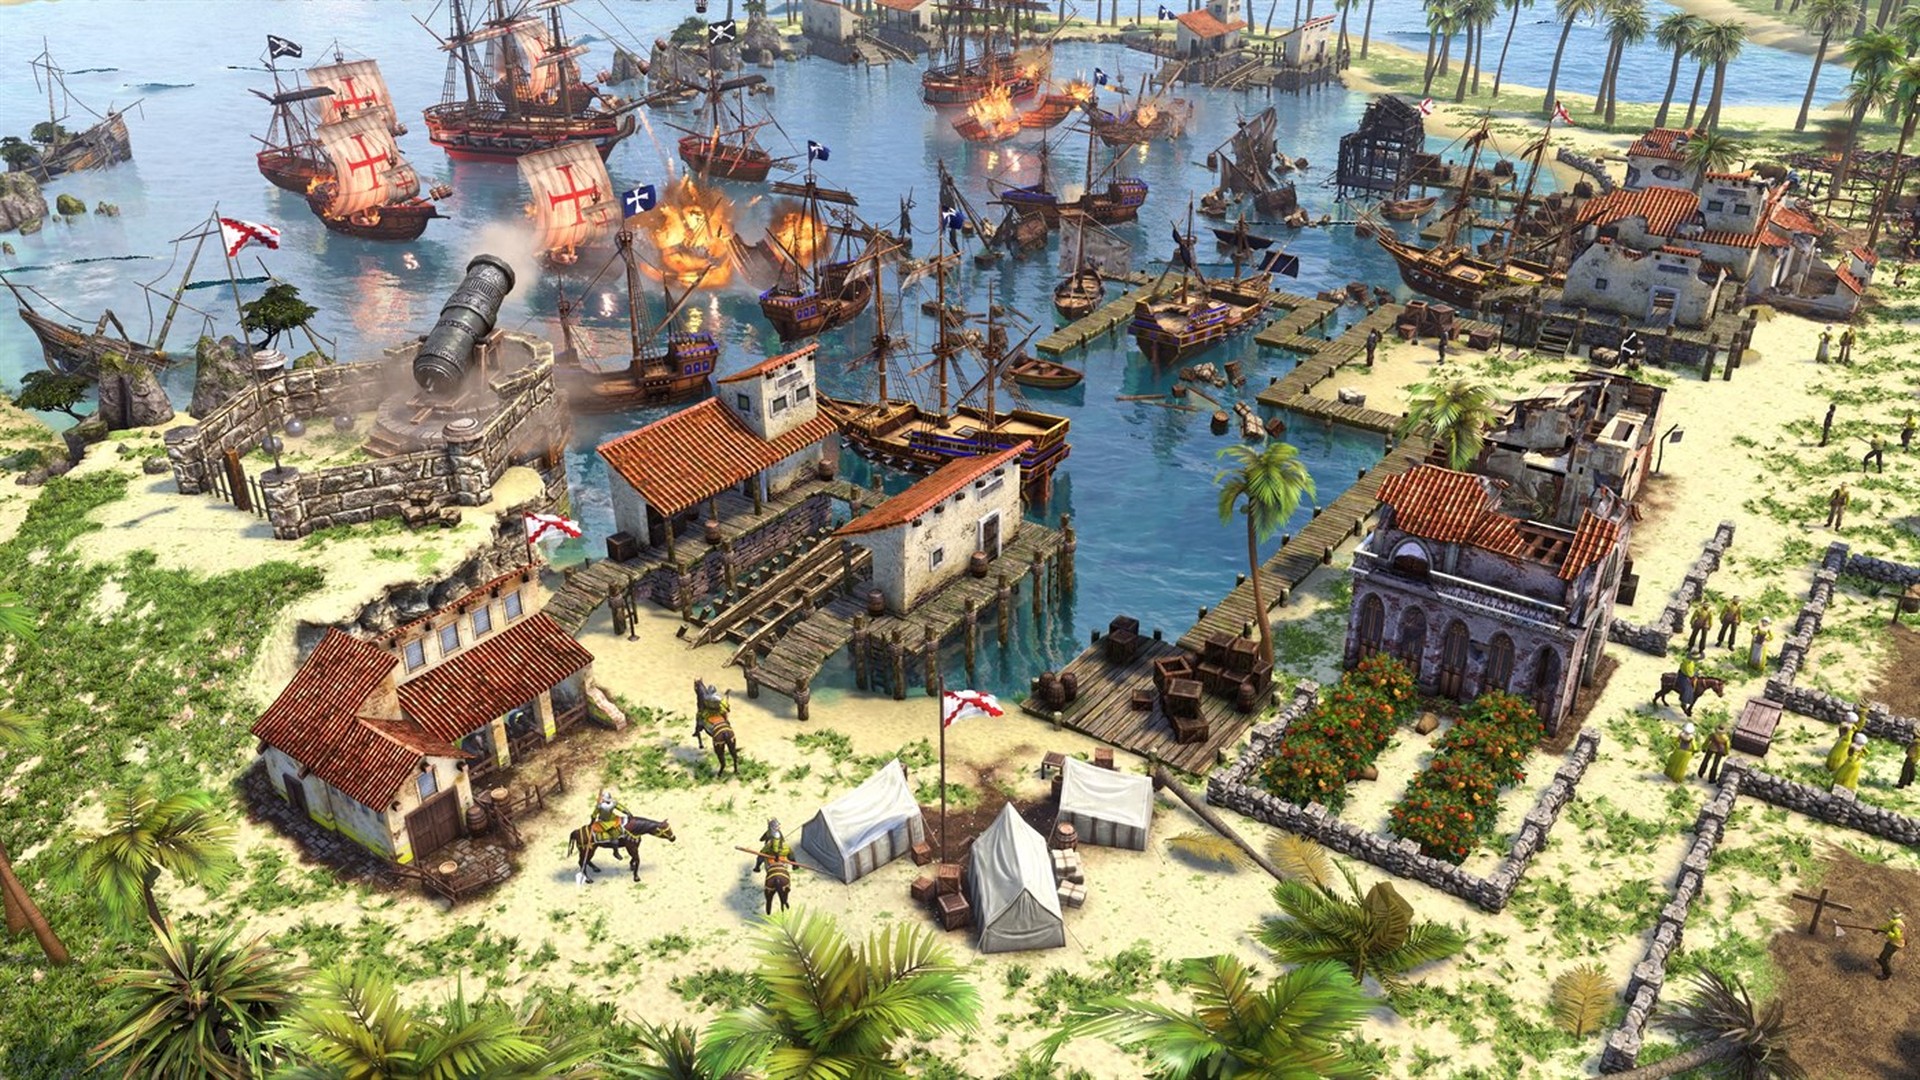 Age of Empires III: Definitive Edition (PC) - October 15